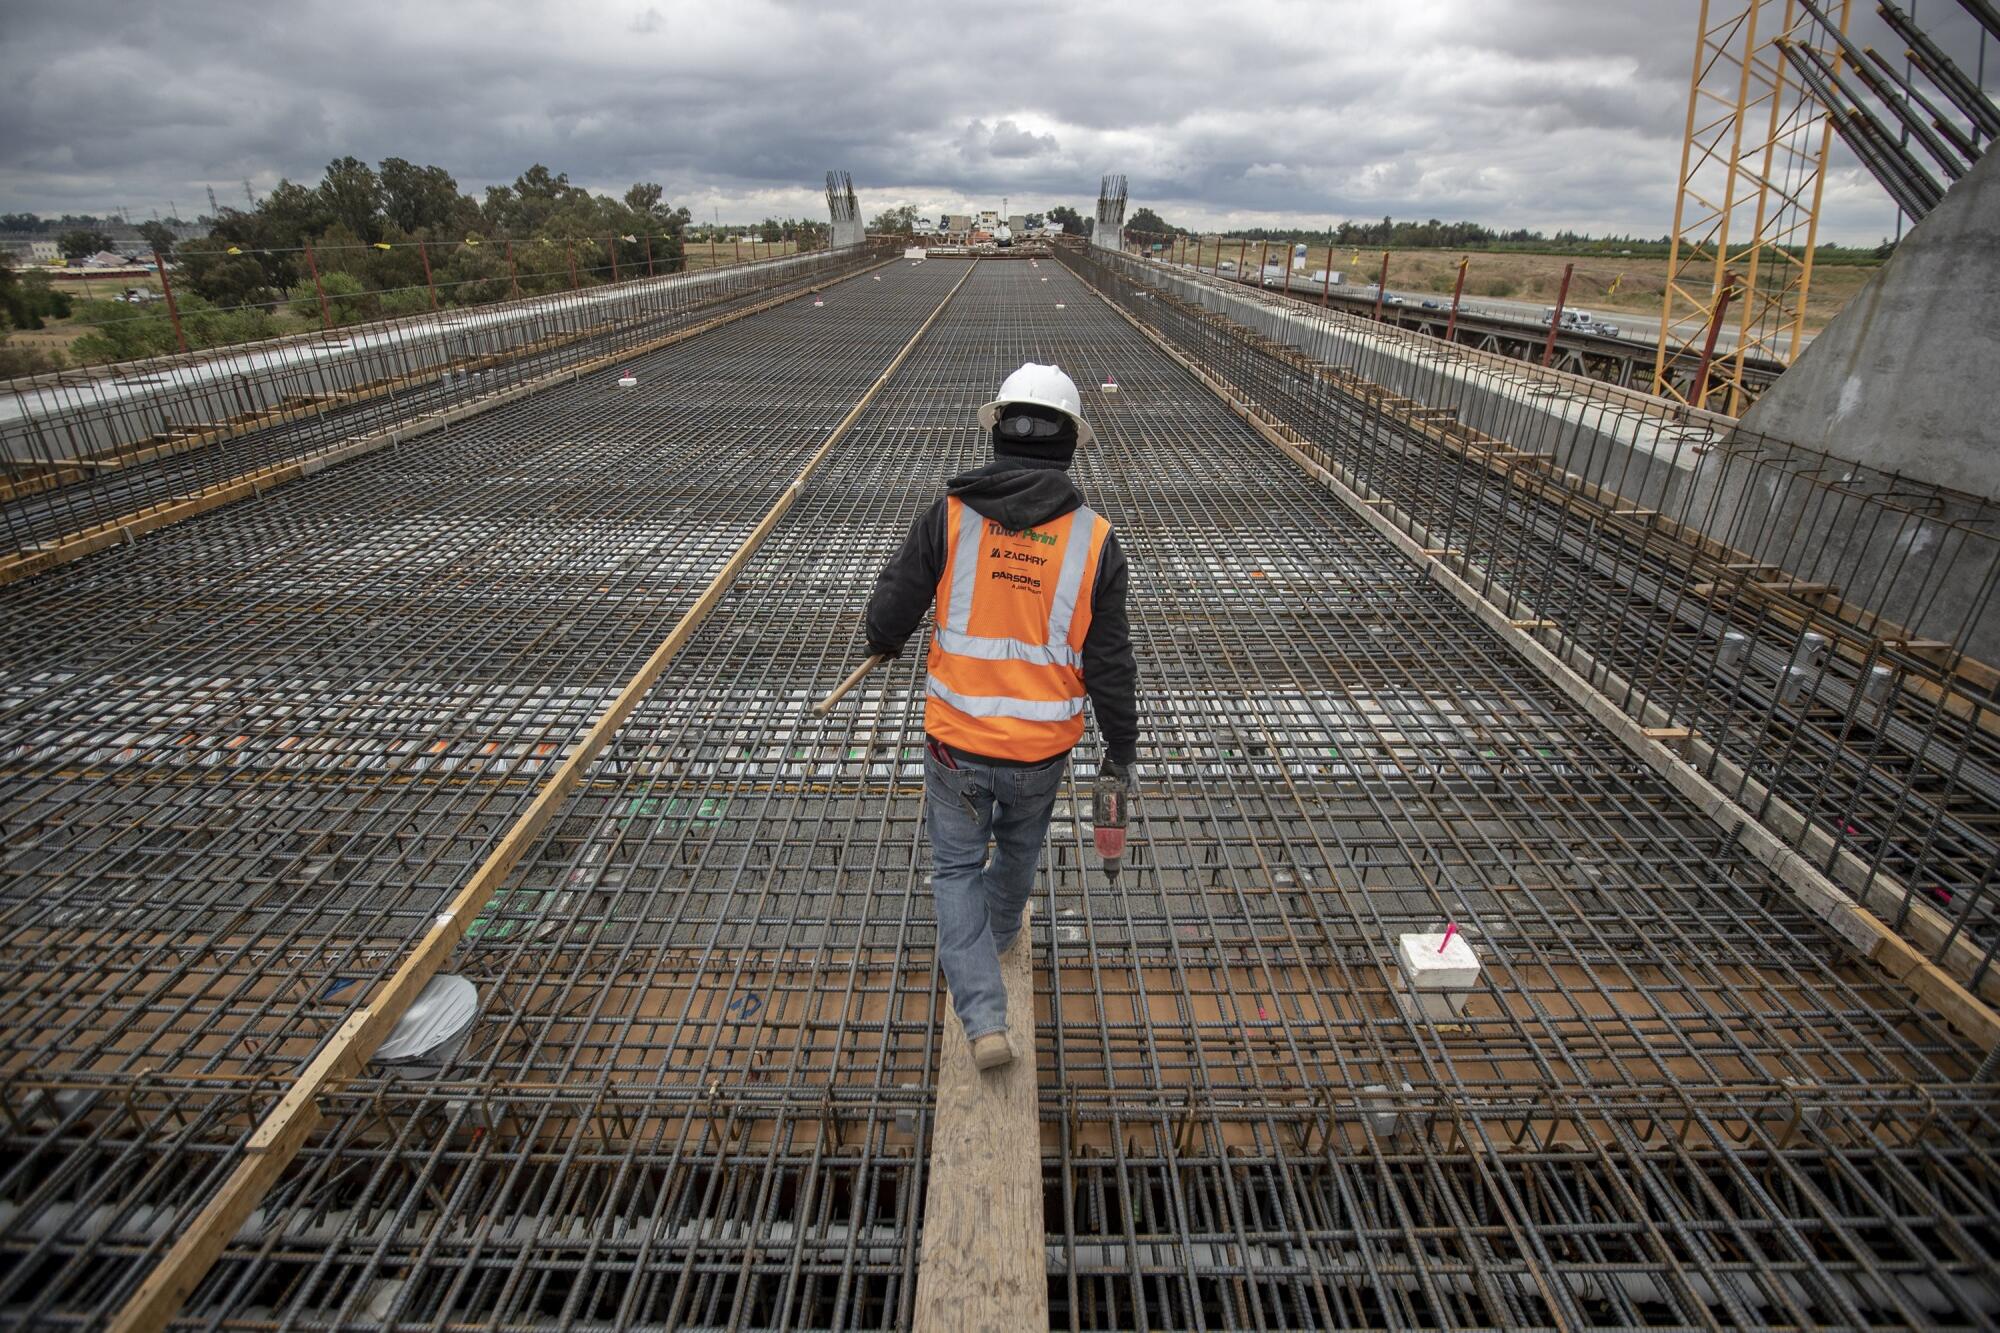 A worker in an orange high-vis vest walks on a plank over a large section of rebar